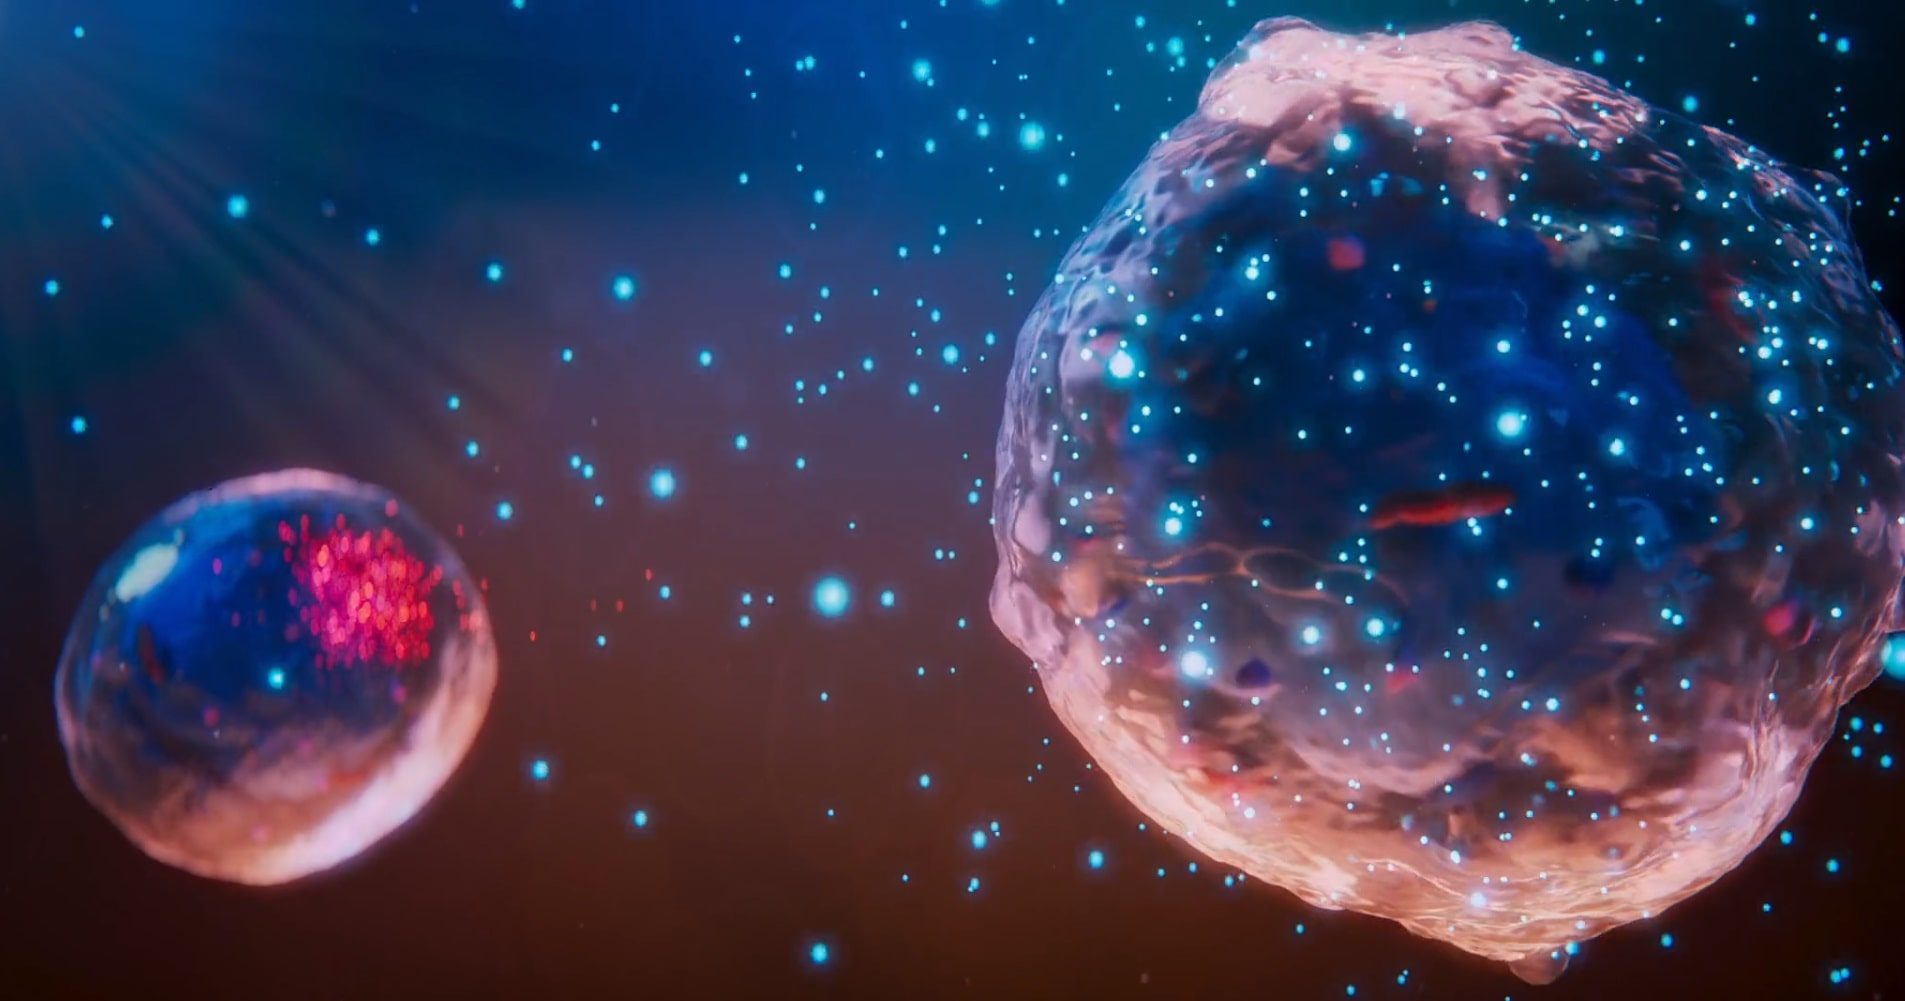 This 3D animation shows two human cells inspired by the universe